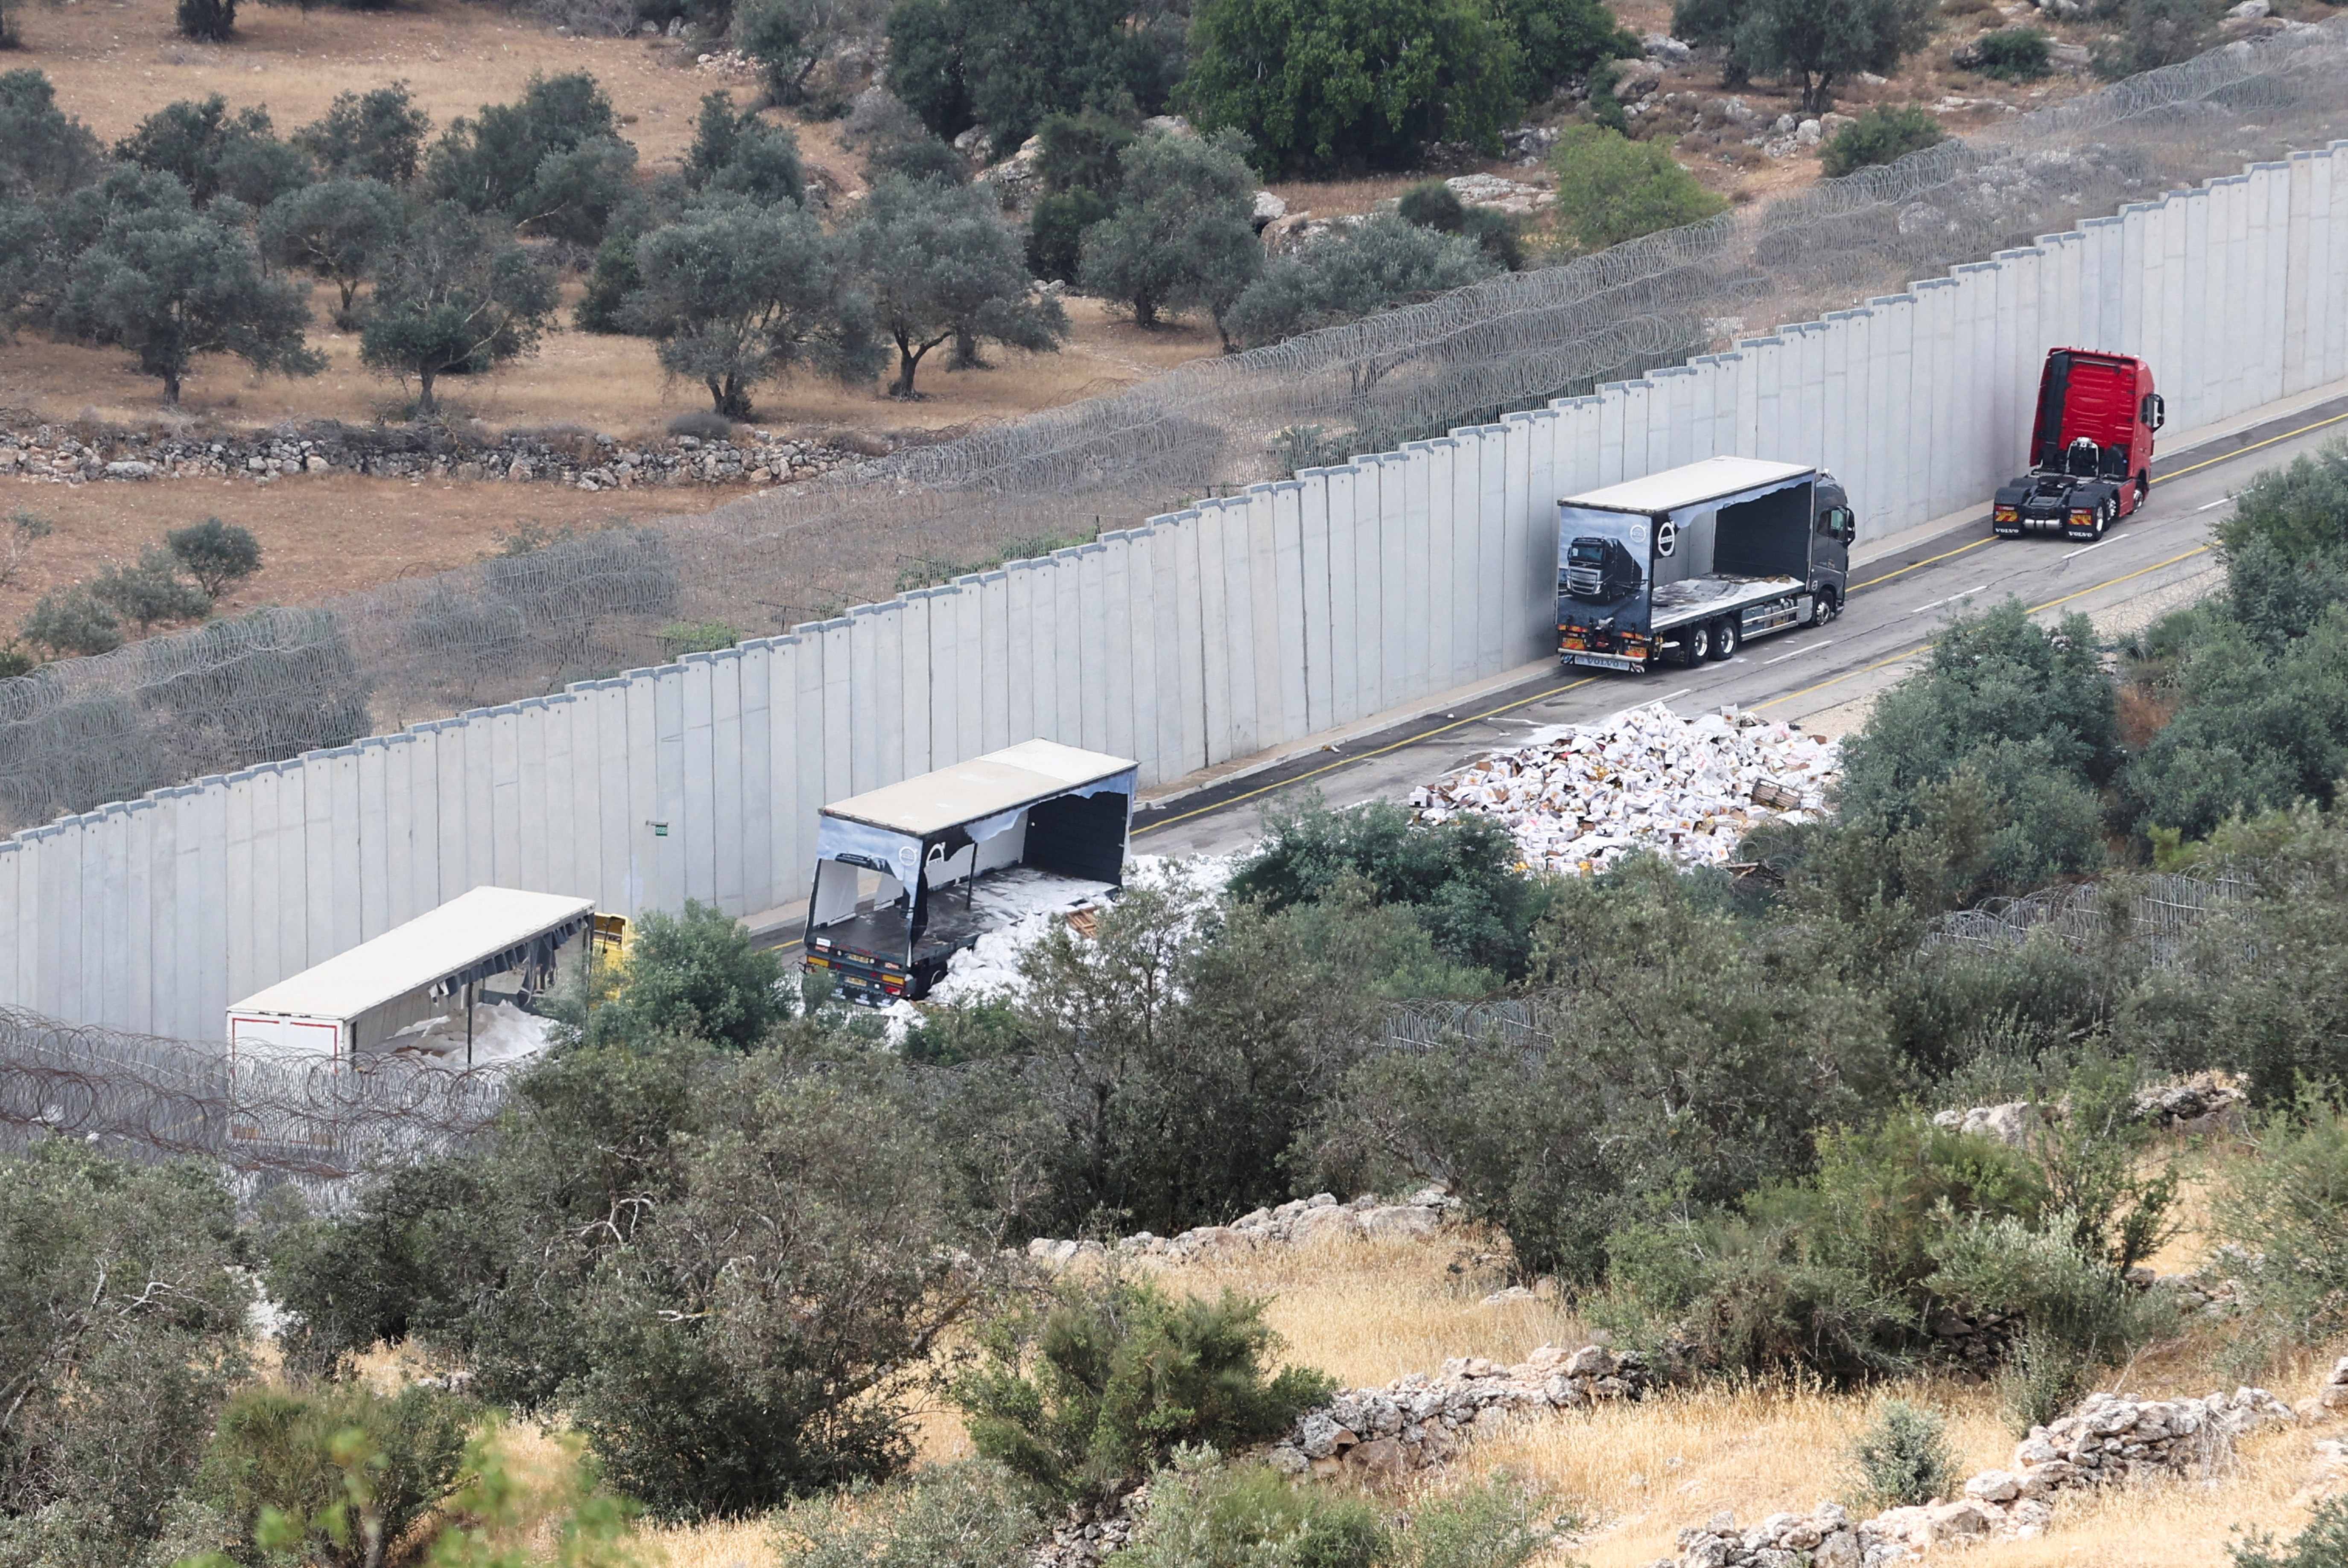 Trucks carrying aid to Gaza stand damaged at checkpoint near Hebron